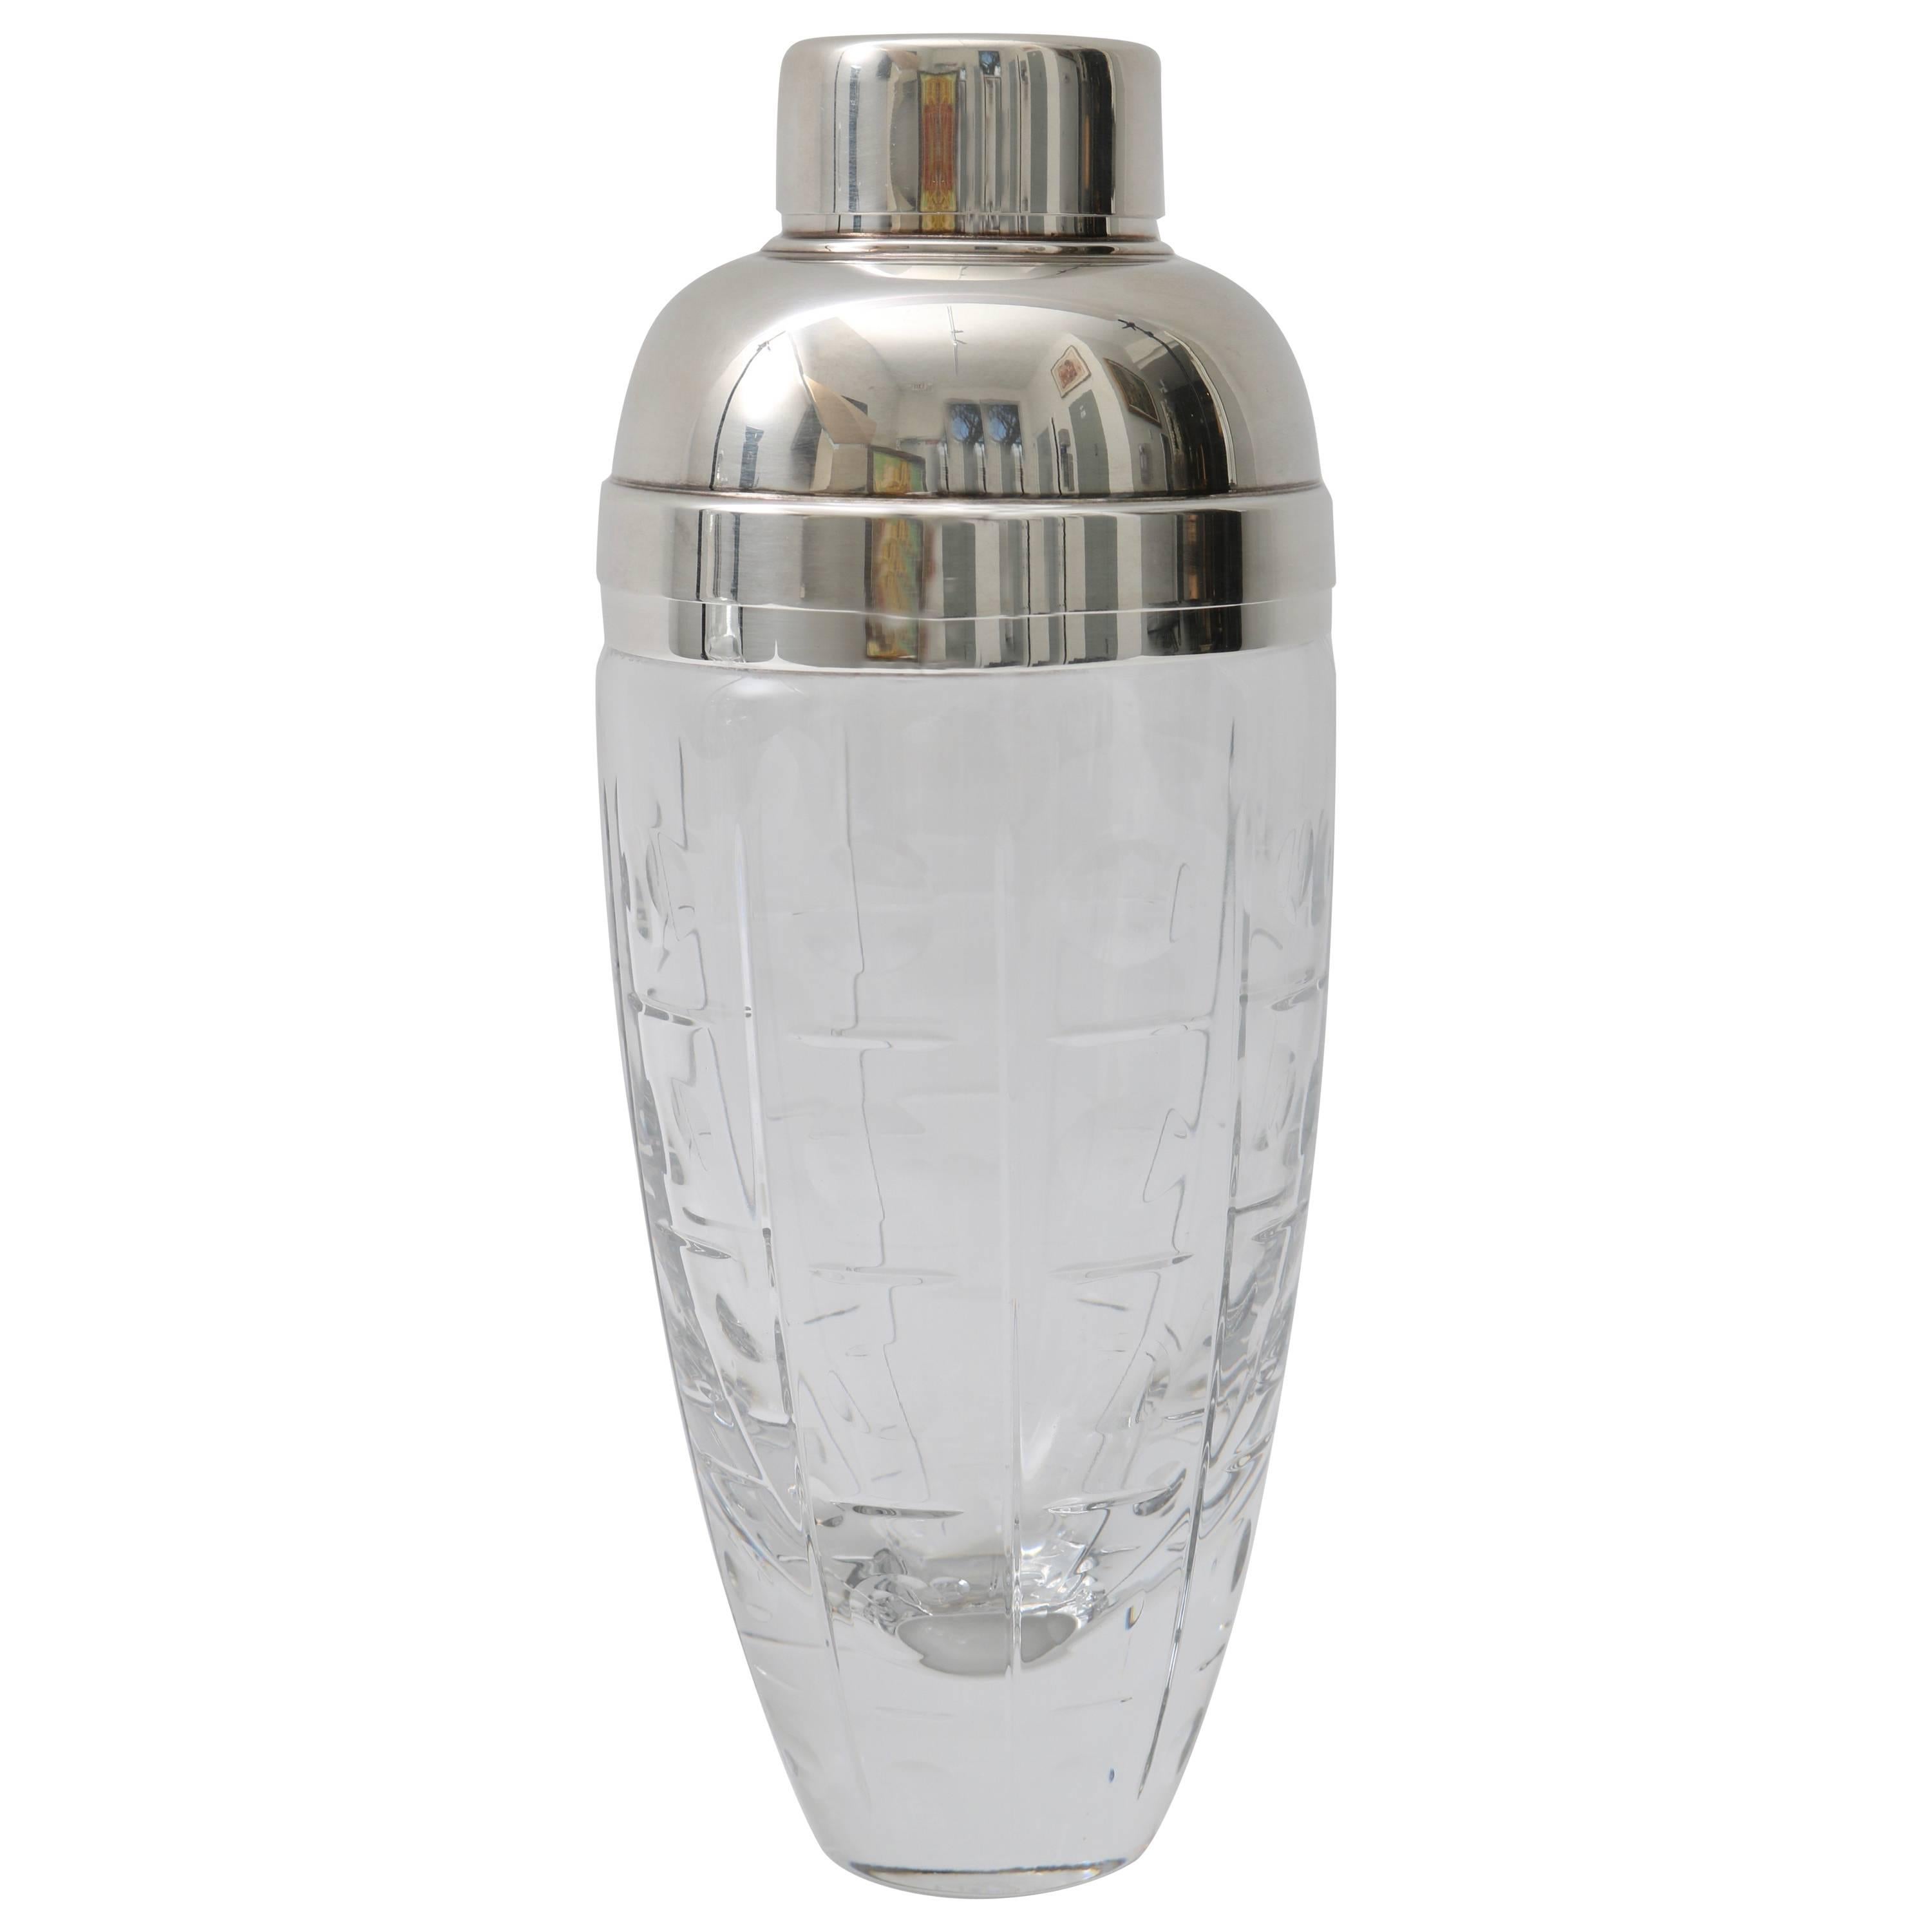 Baccarat Cut Crystal and Silver Plated Martini, Drink Shaker